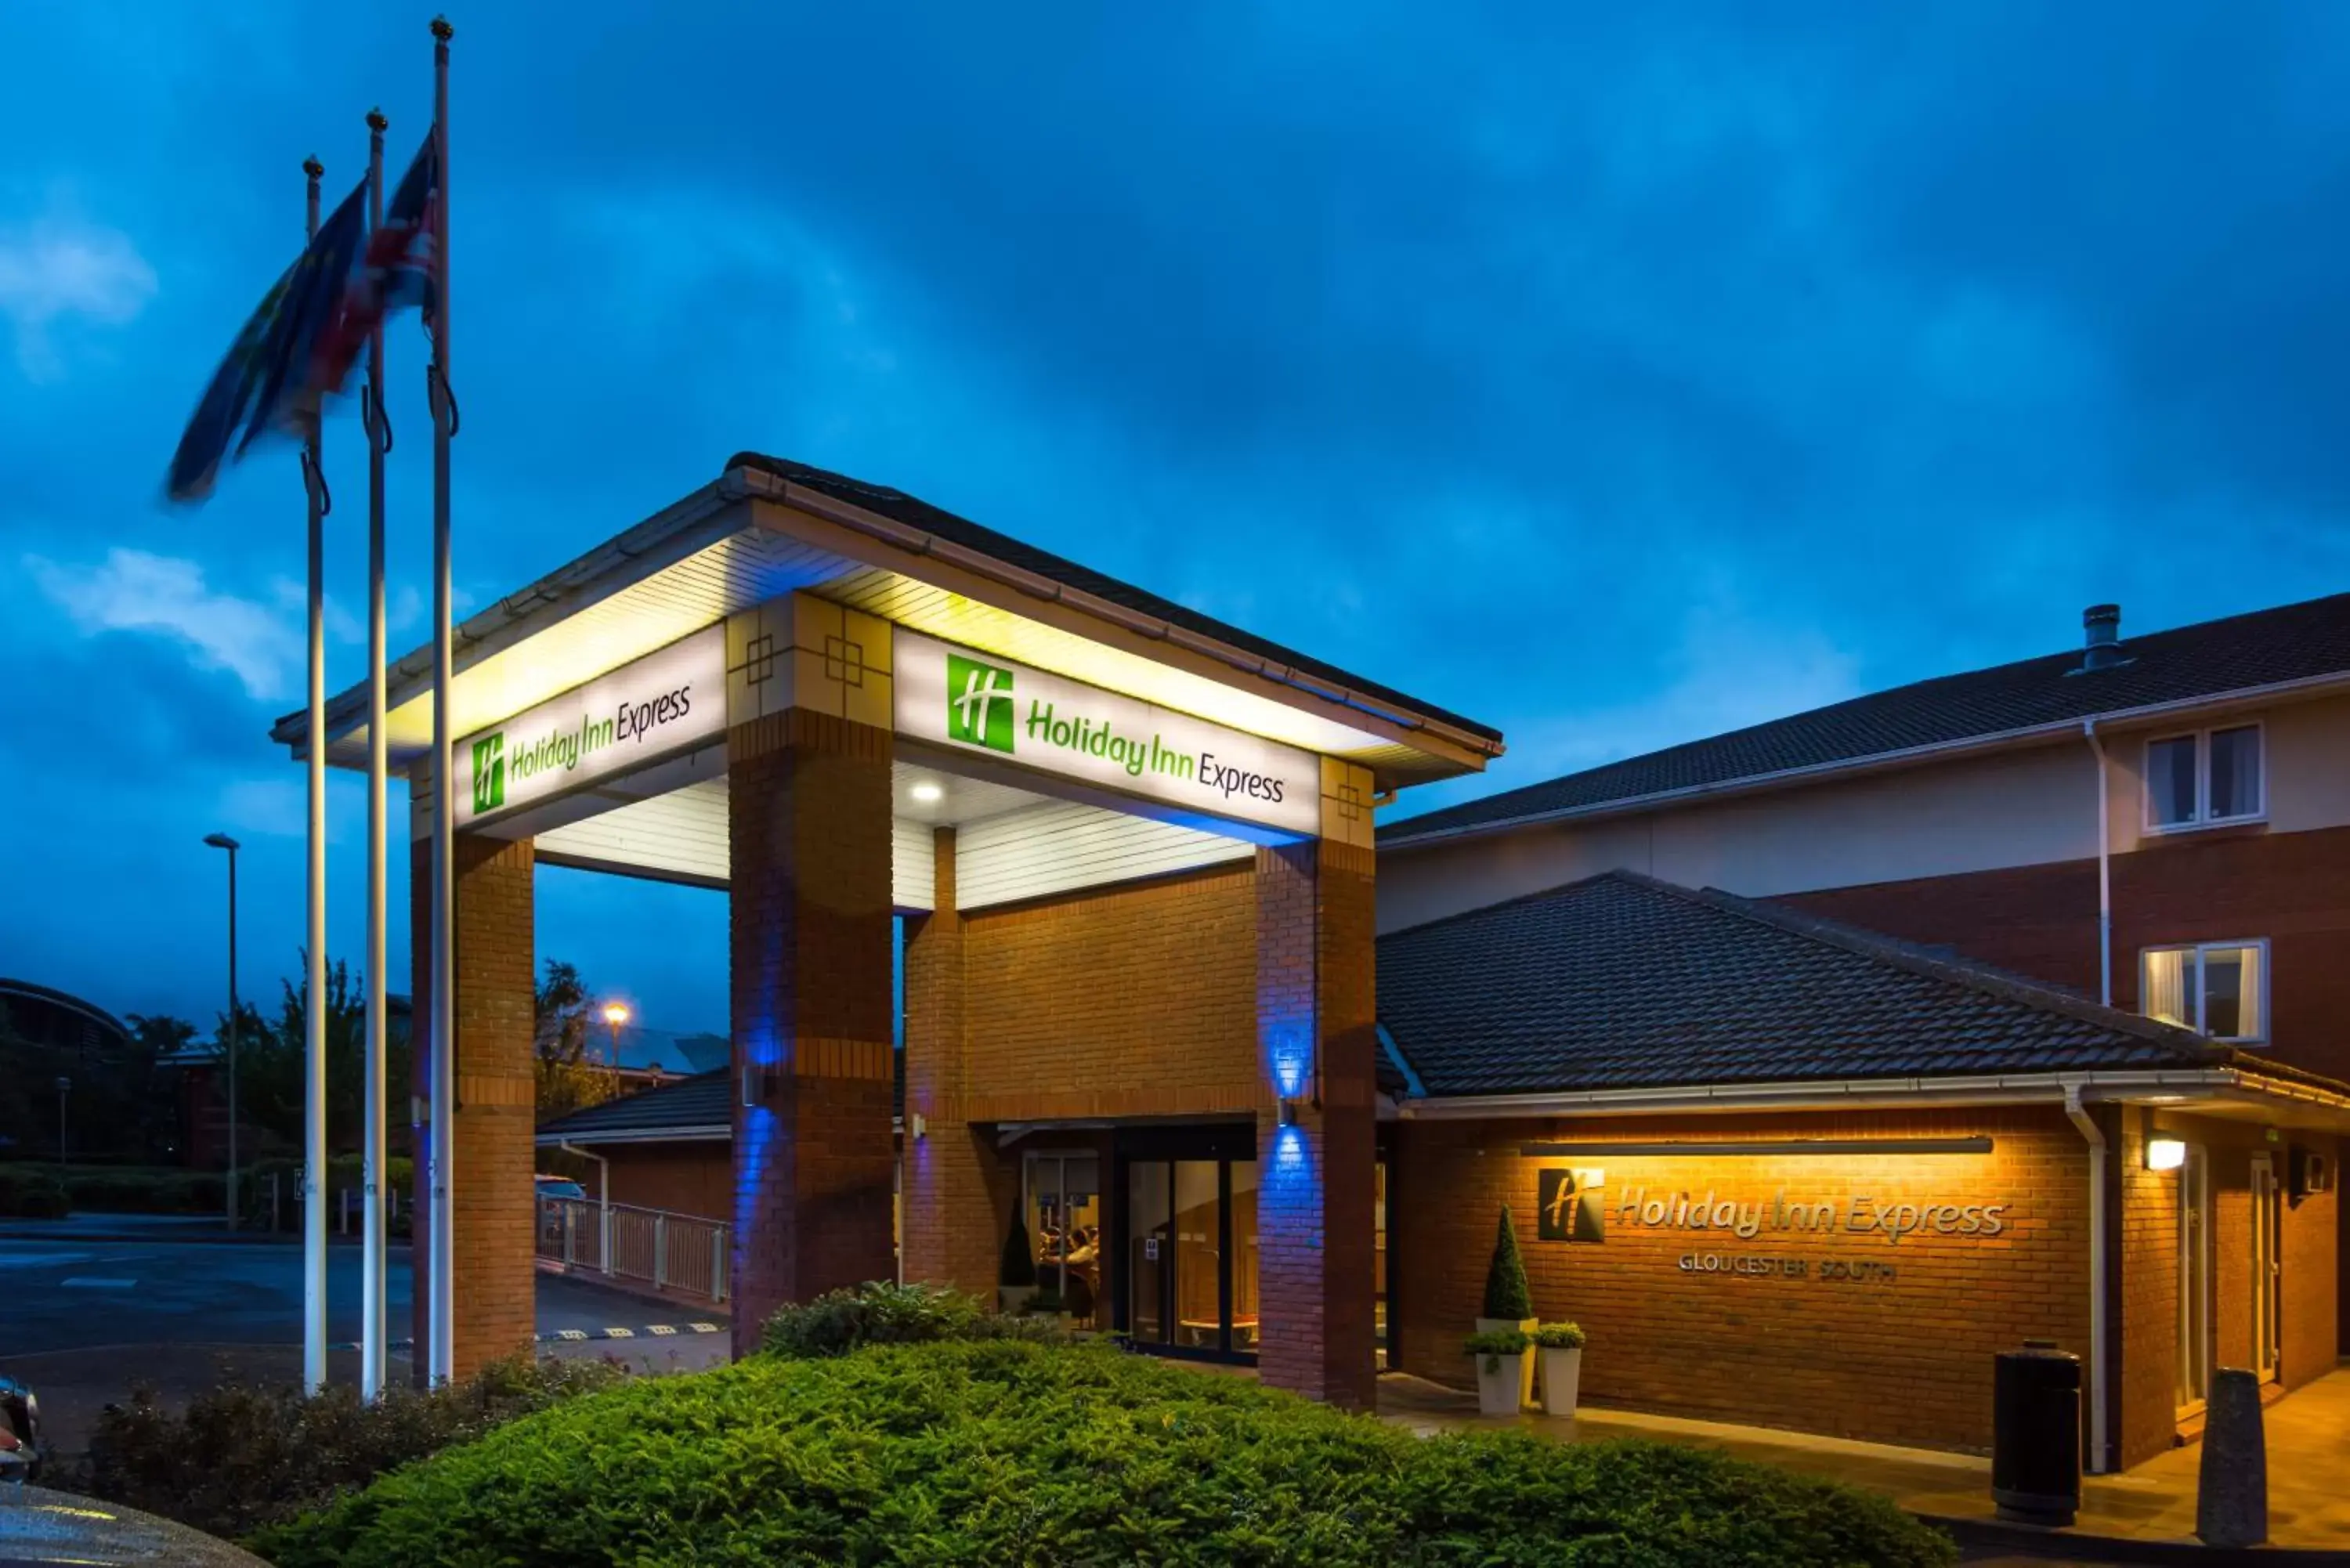 Property Building in Holiday Inn Express Gloucester - South, an IHG Hotel